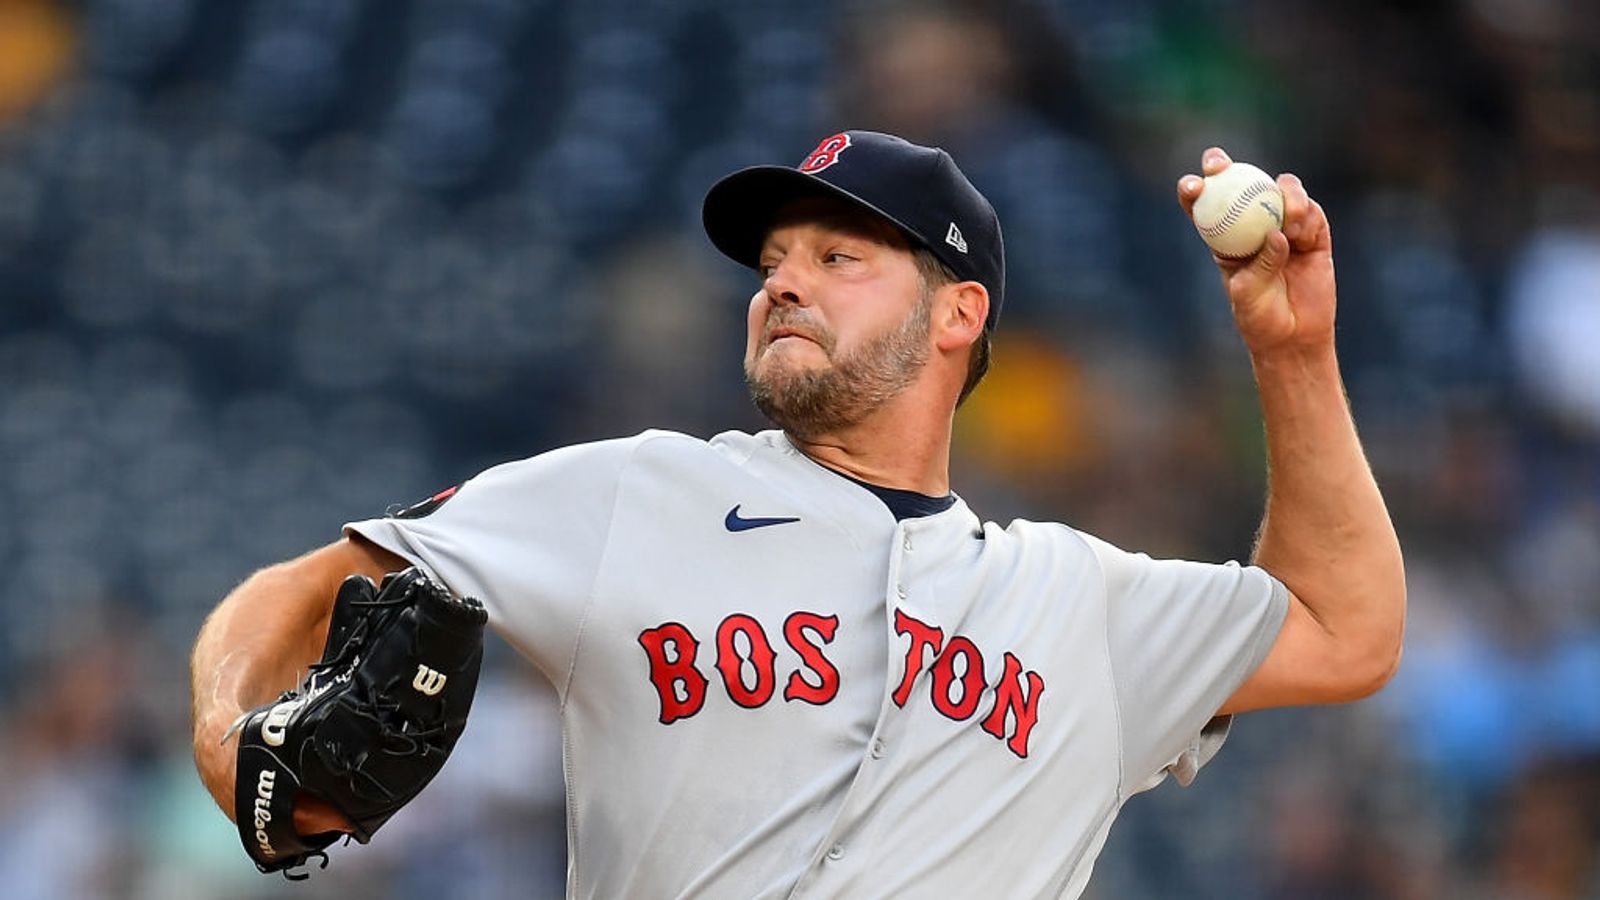 BSJ LIve Coverage: Red Sox vs. Rays, 6:40 p.m.